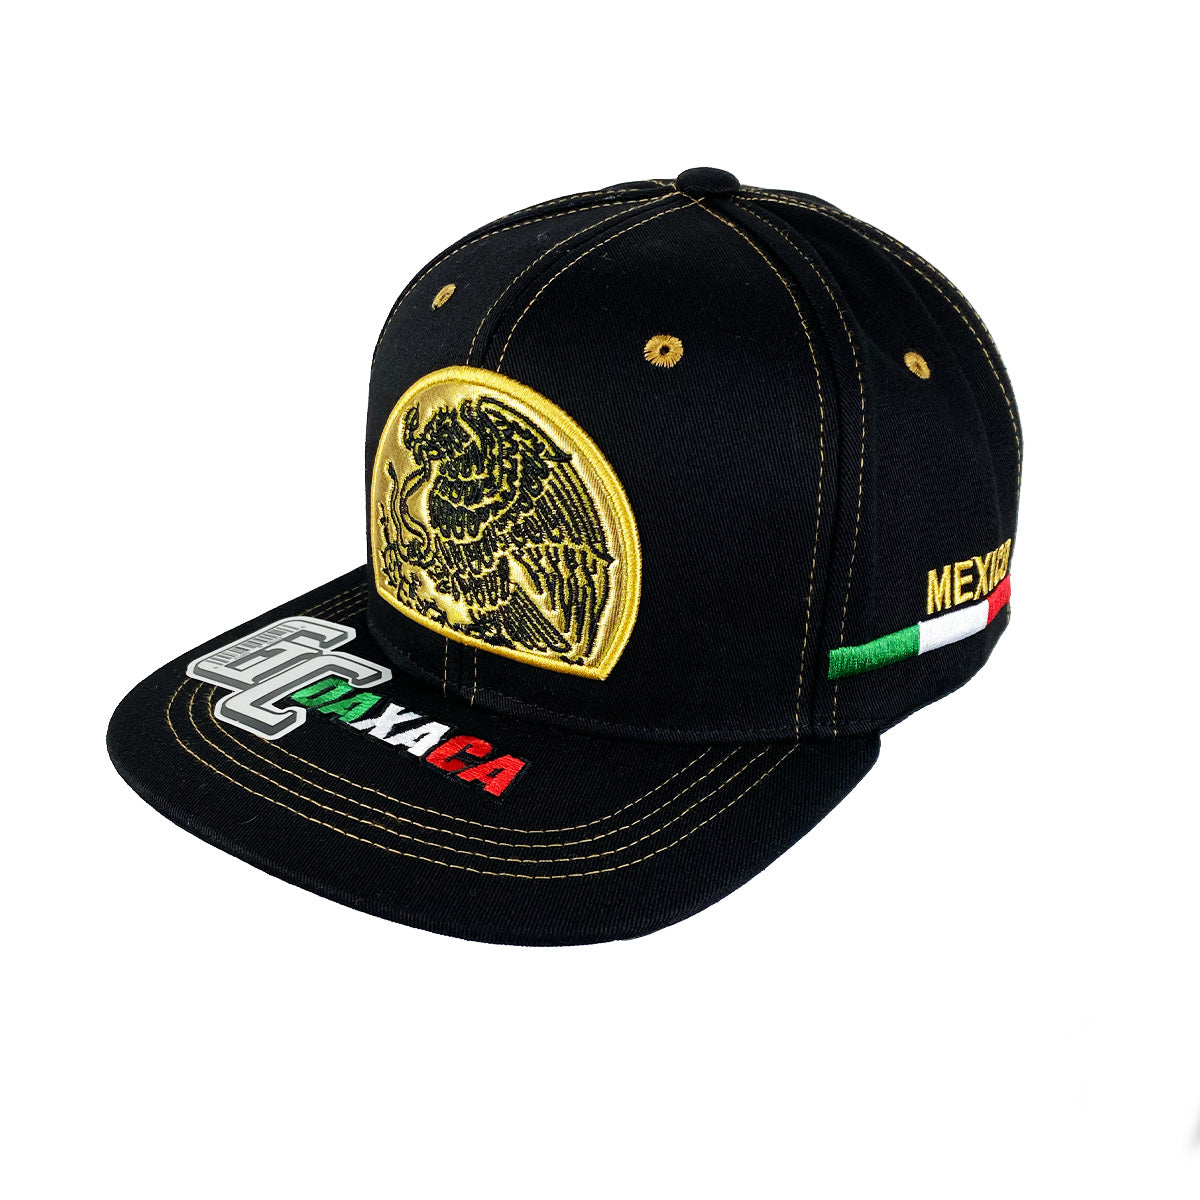 Snapback ''Oaxaca Mexico'' HAT Embroidered